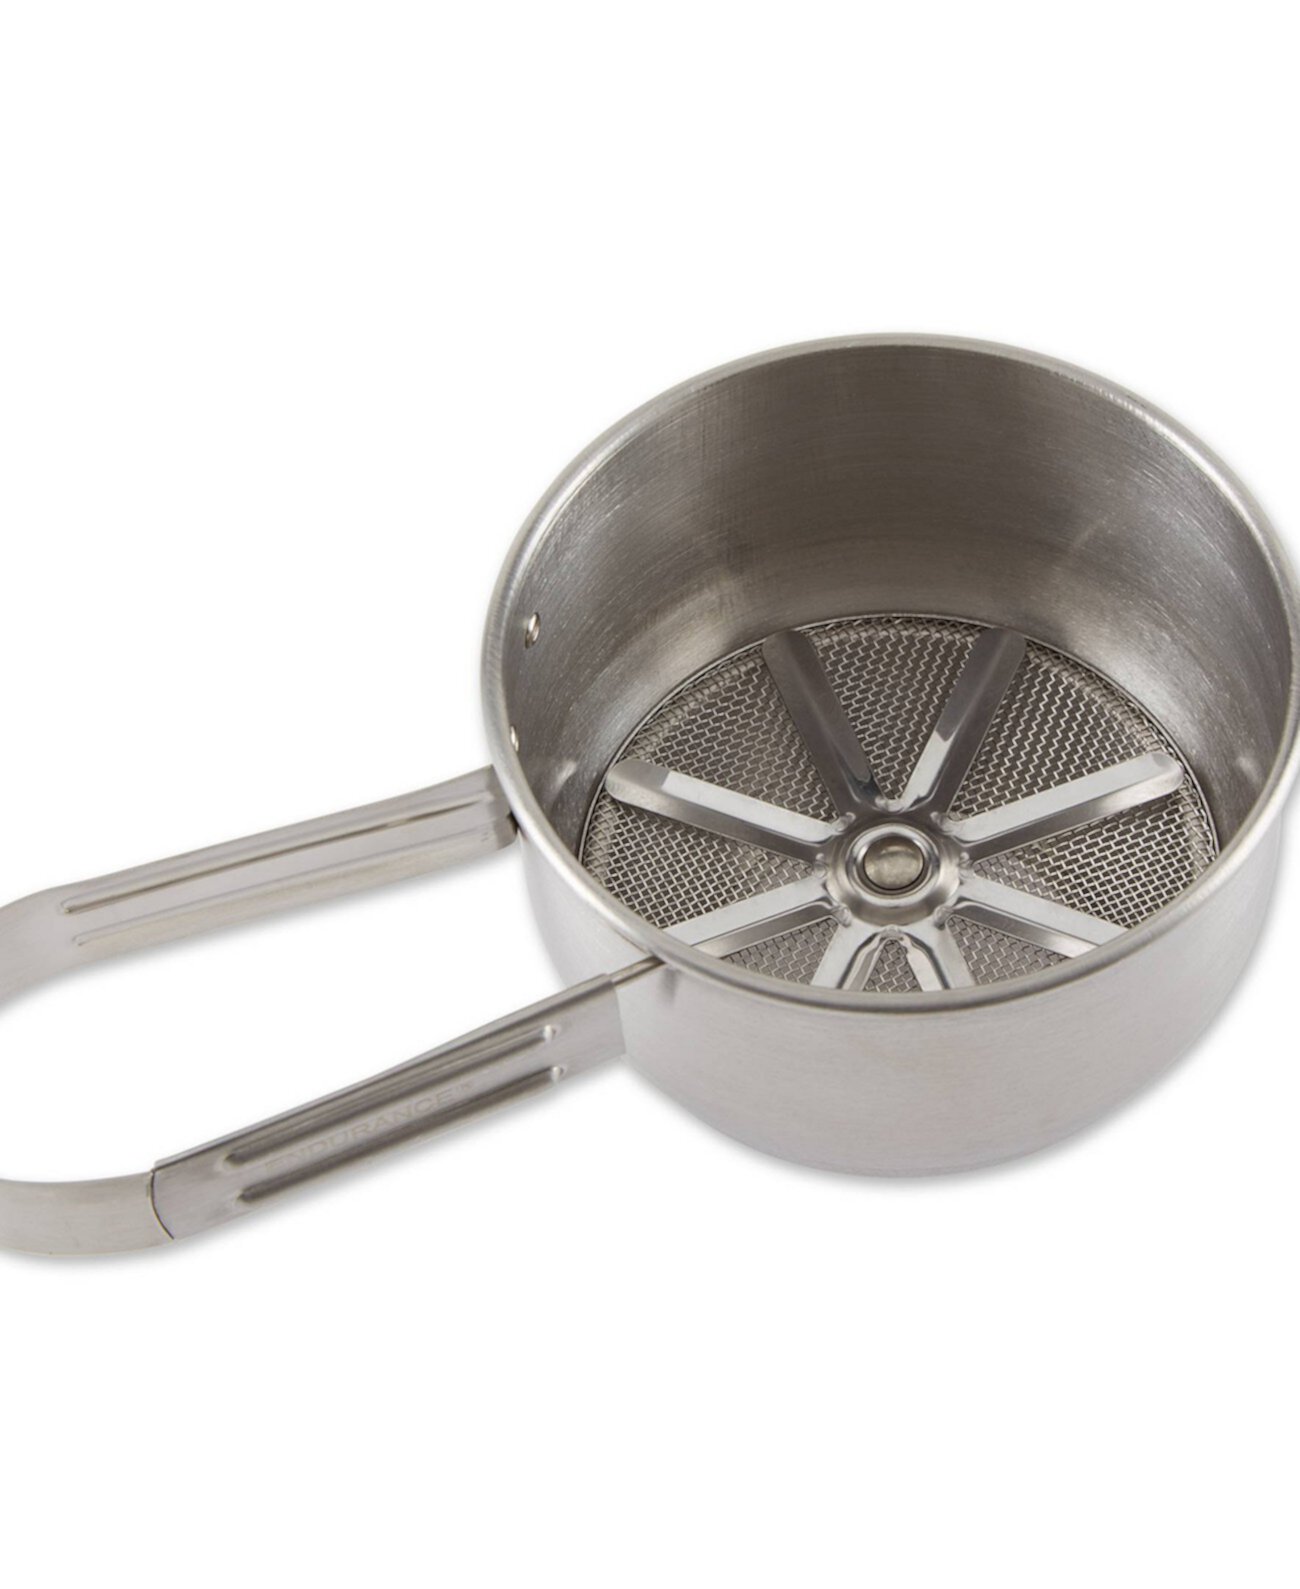 Endurance Stainless Steel 1 Cup Sifter RSVP International